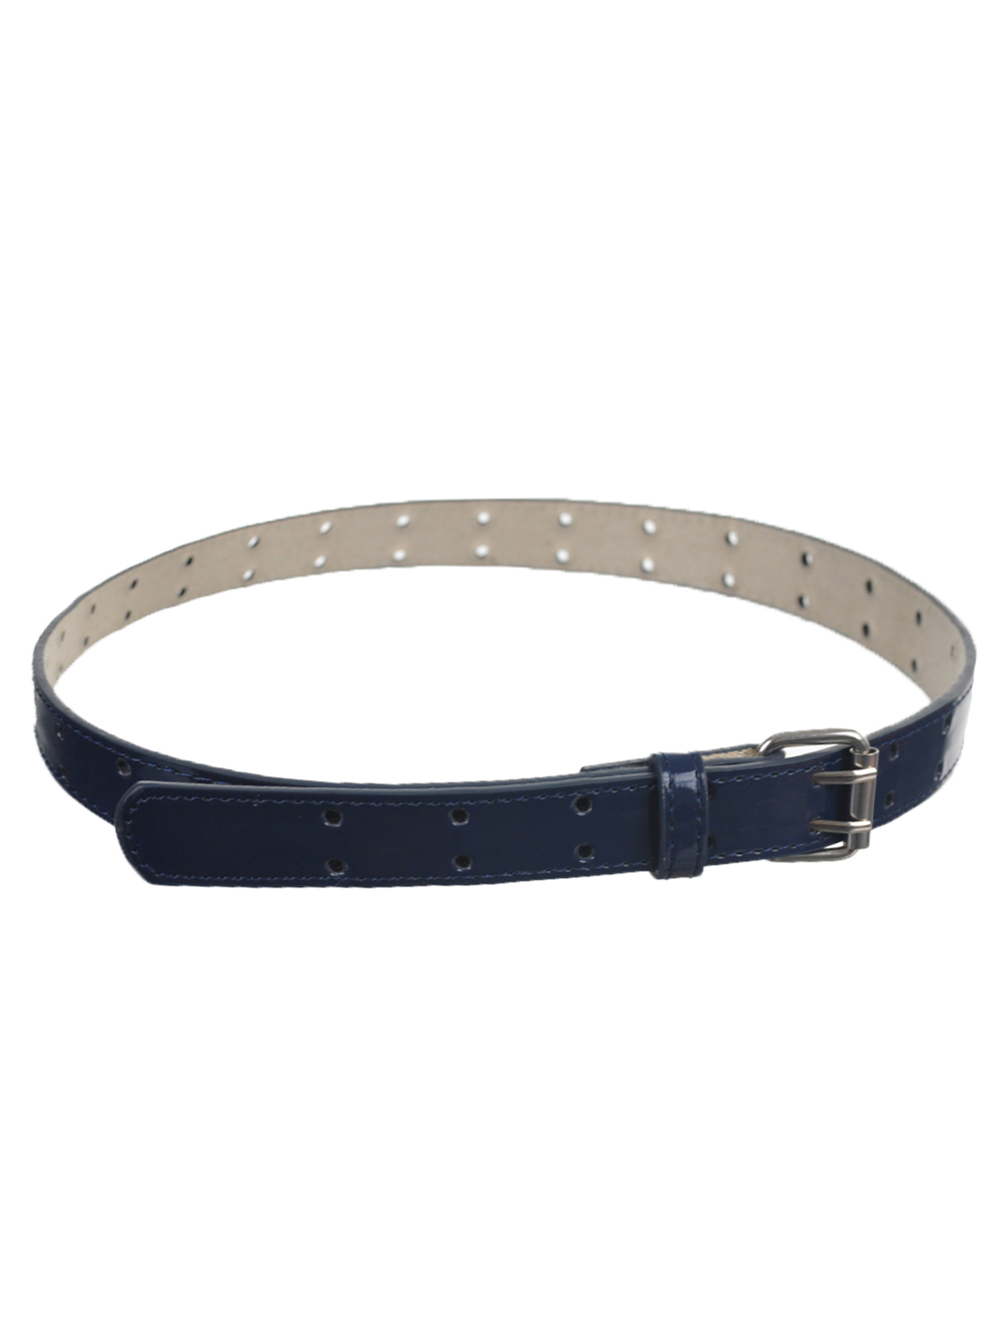 Size l Belts for Girls